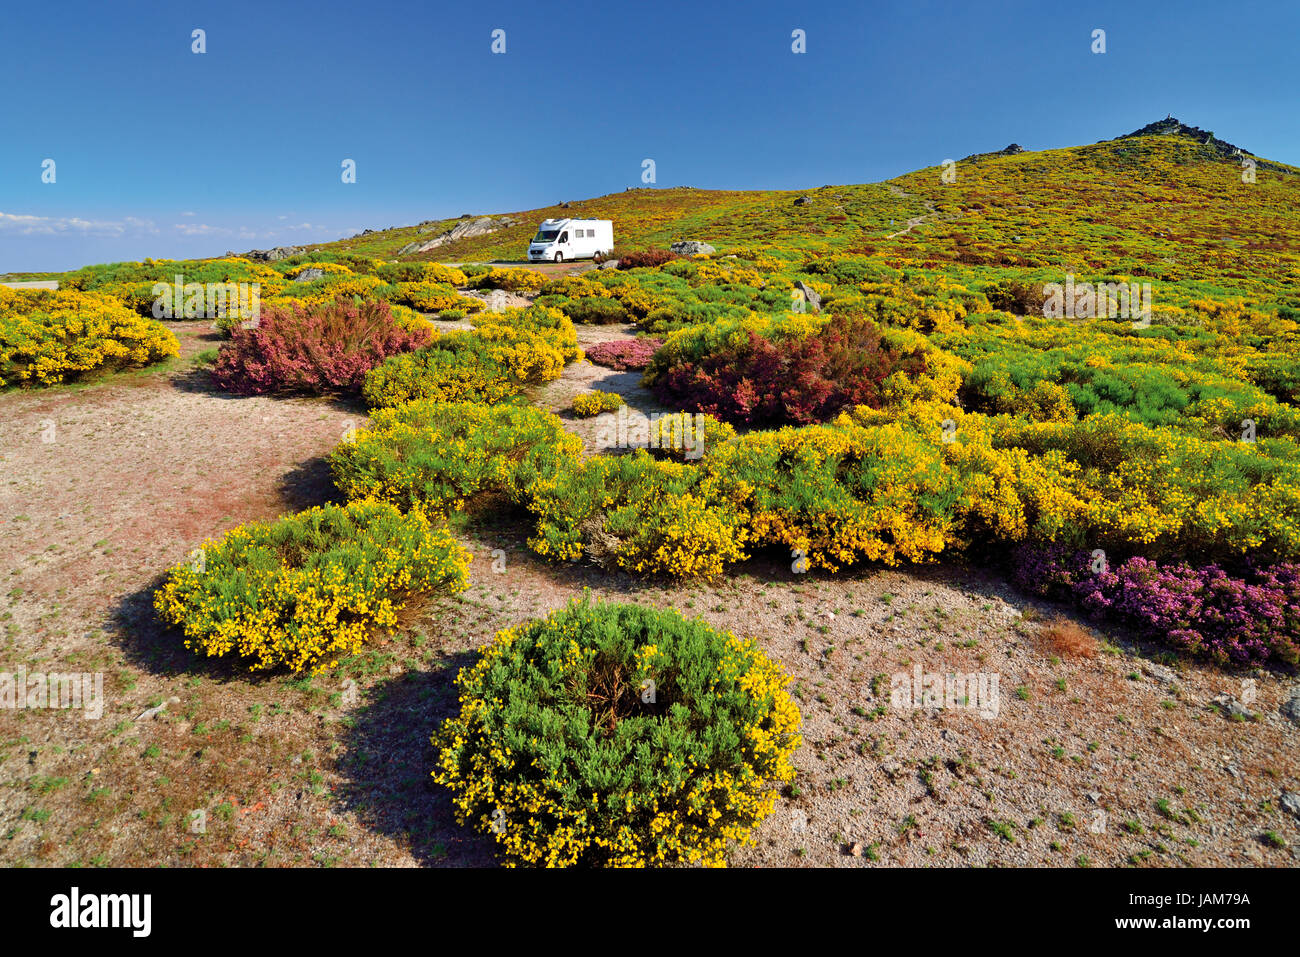 Motorhome alone in the middle of green mountain vegetation with yellow and violett flowers in blossom Stock Photo